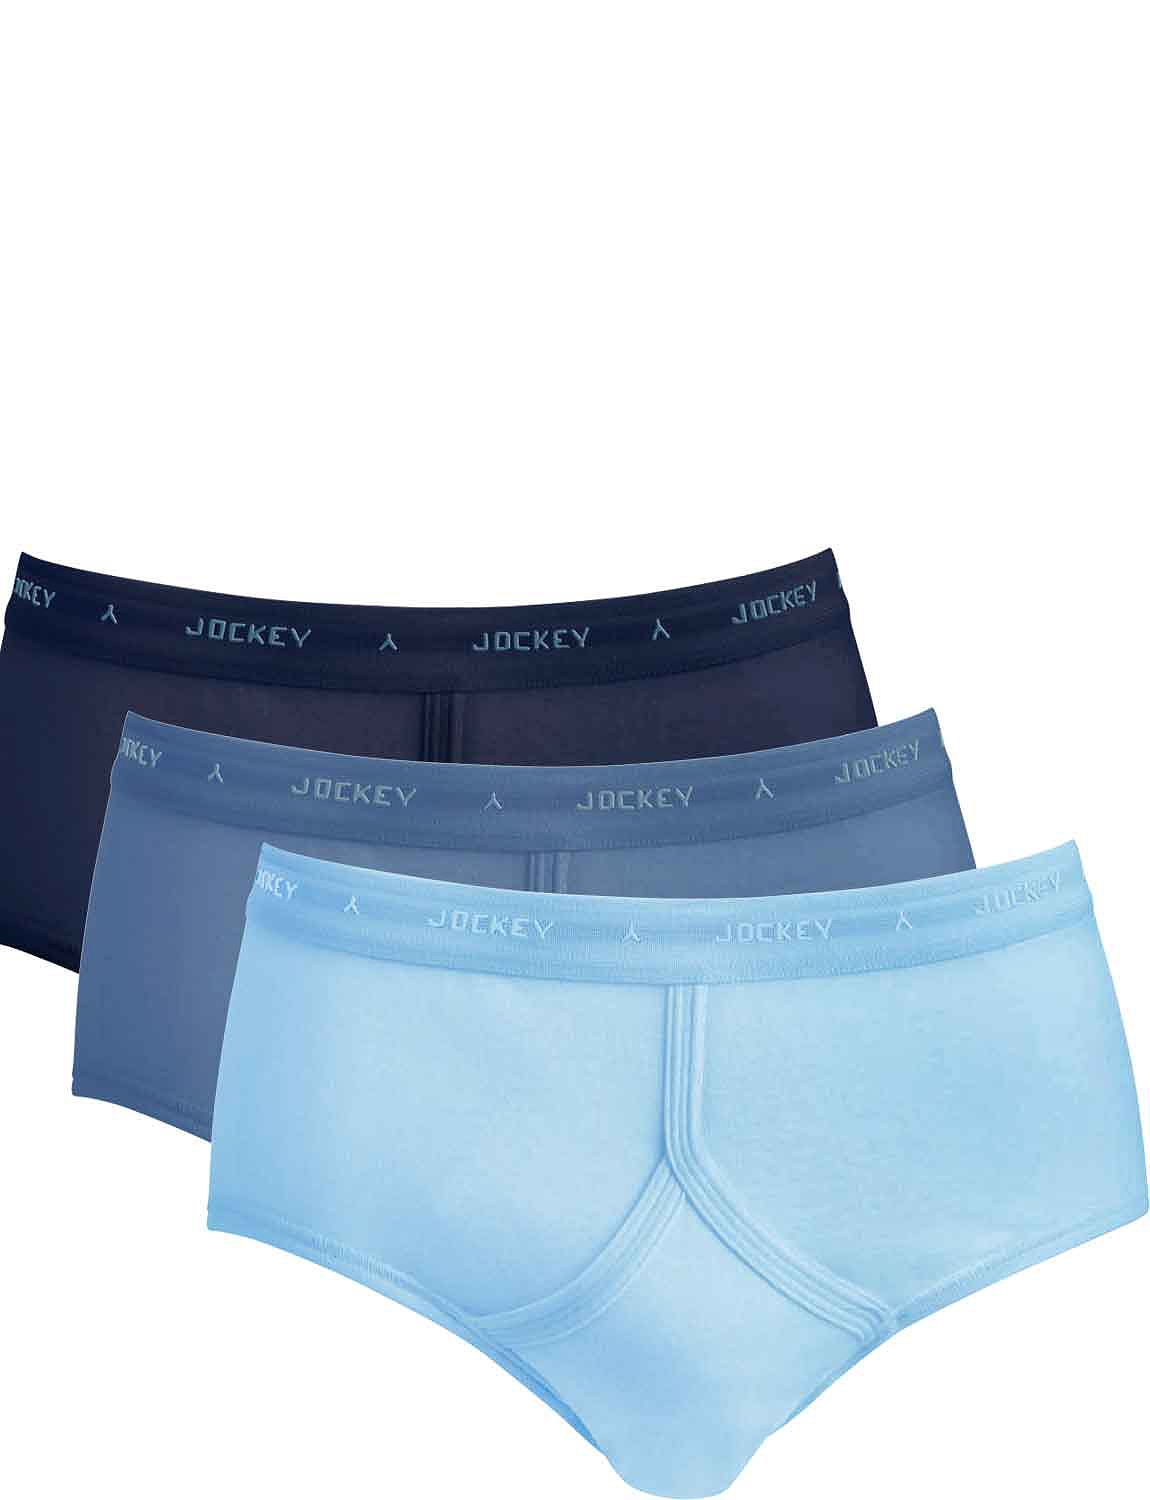 3-Pack Jockey Classic Y-Front Brief - Brief - Trunks - Underwear -  Timarco.co.uk